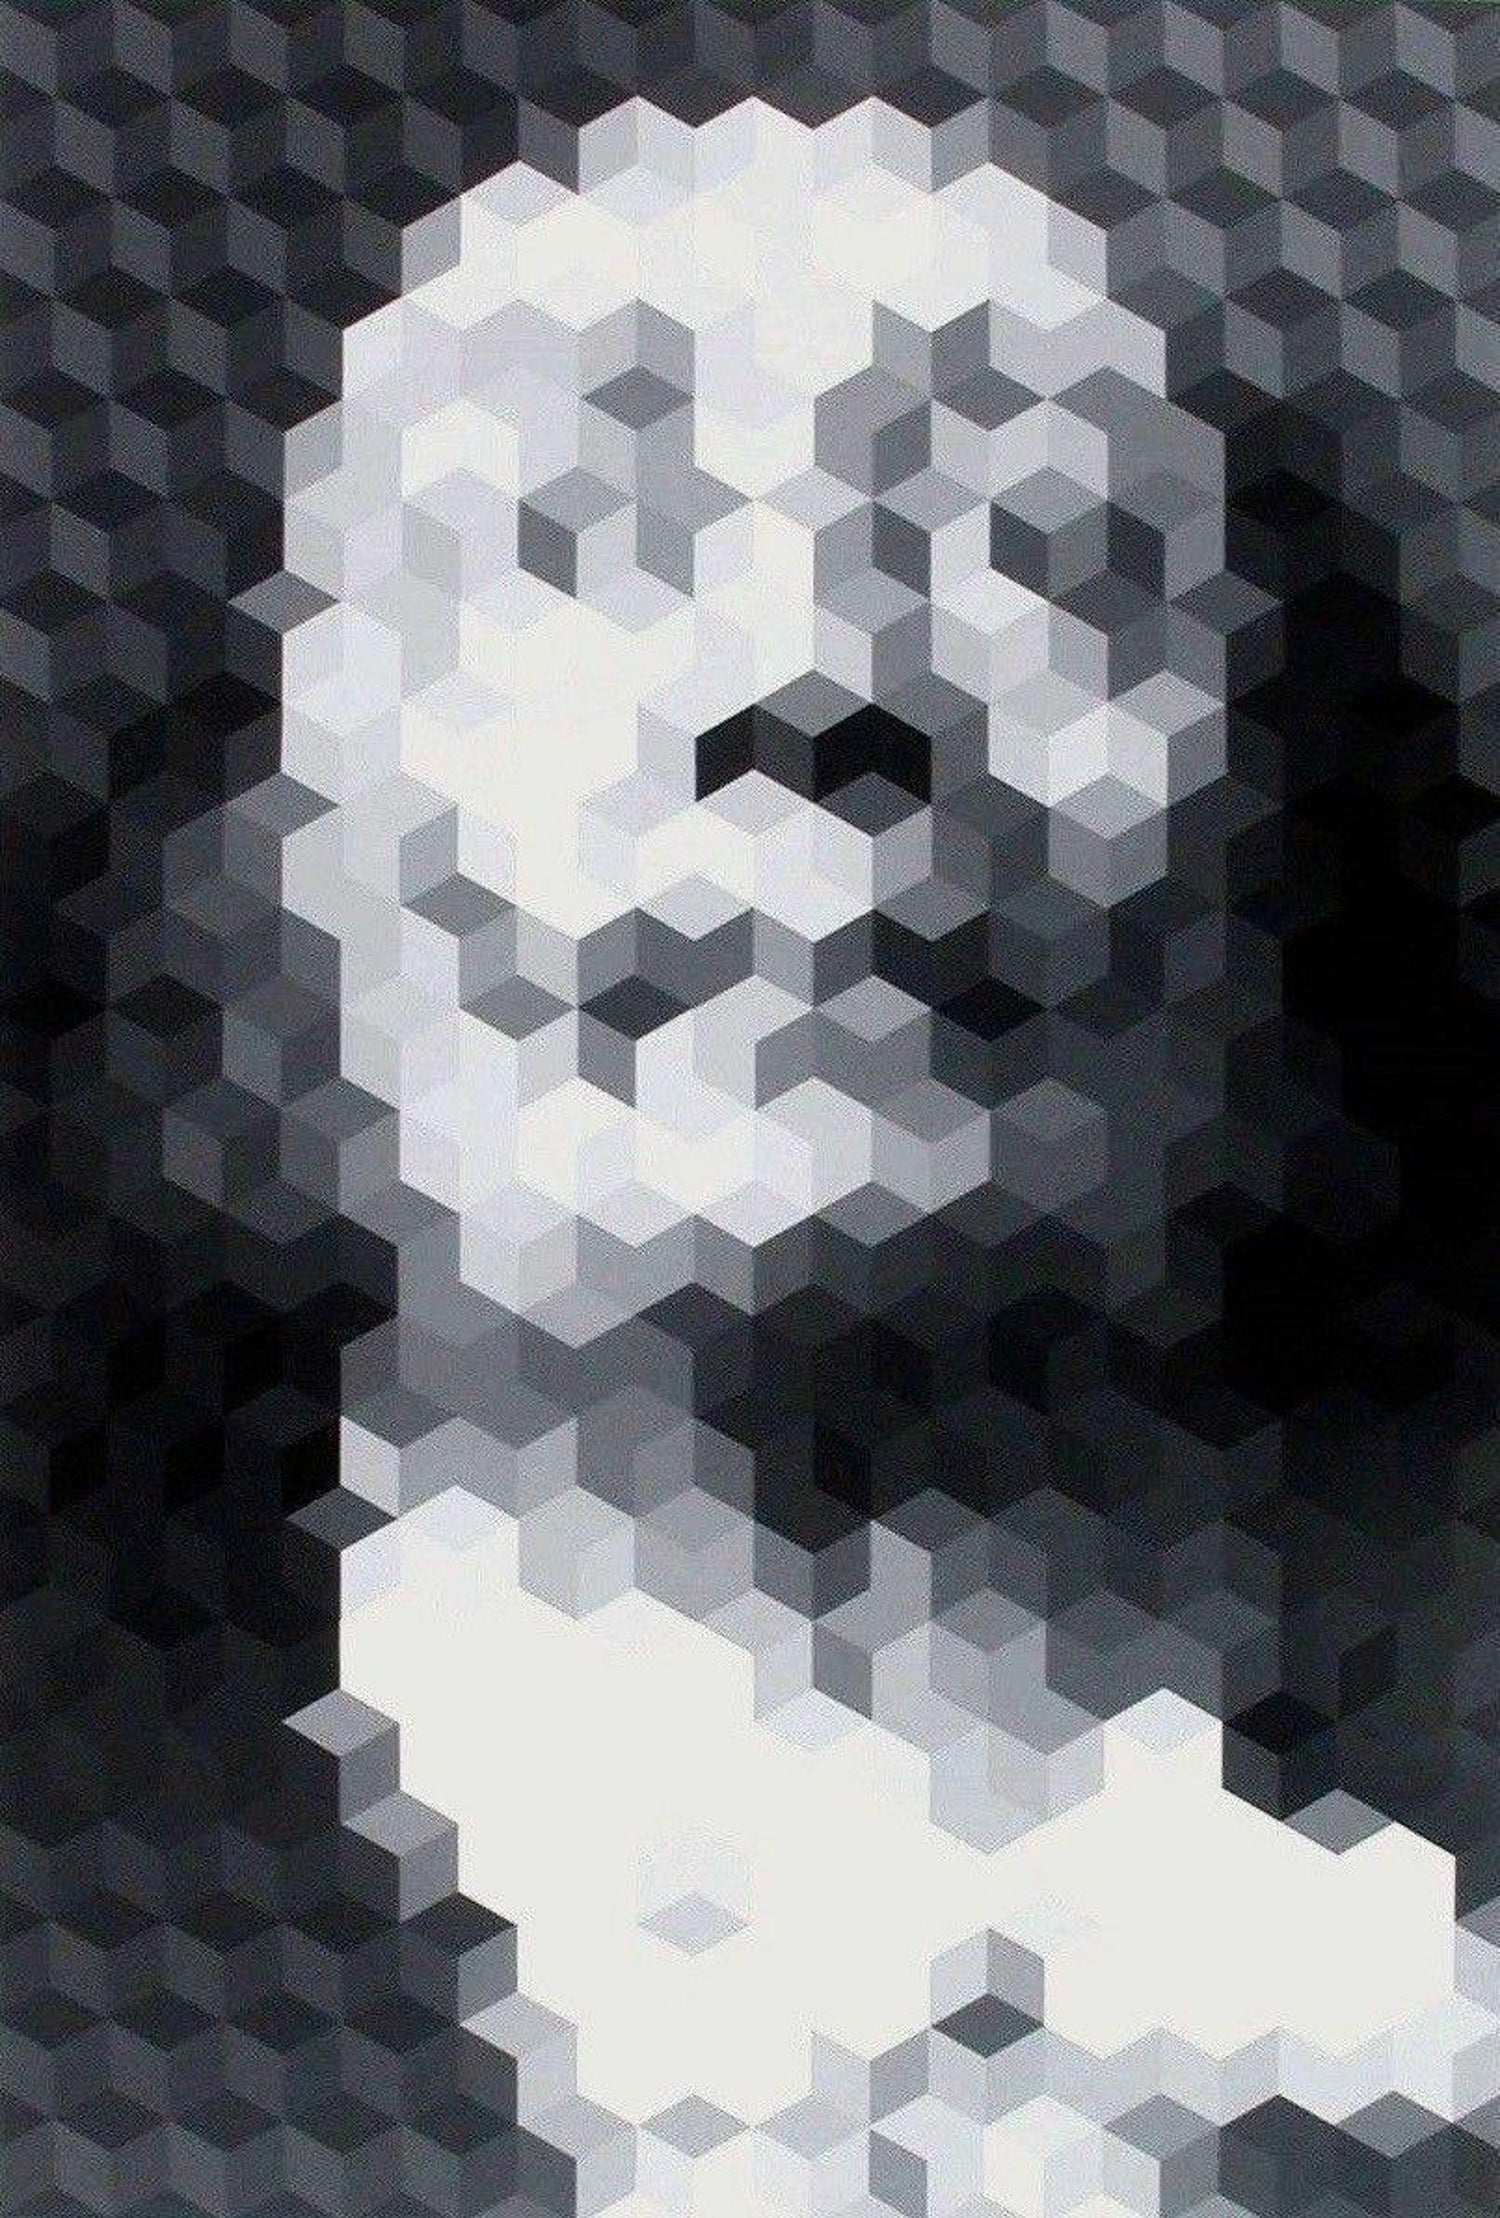 Yvaral (Jean-Pierre Vasarely) - Faces of Dali #2, Yvaral at 1stDibs | jean-pierre  yvaral, jean pierre yvaral, yvaral vasarely